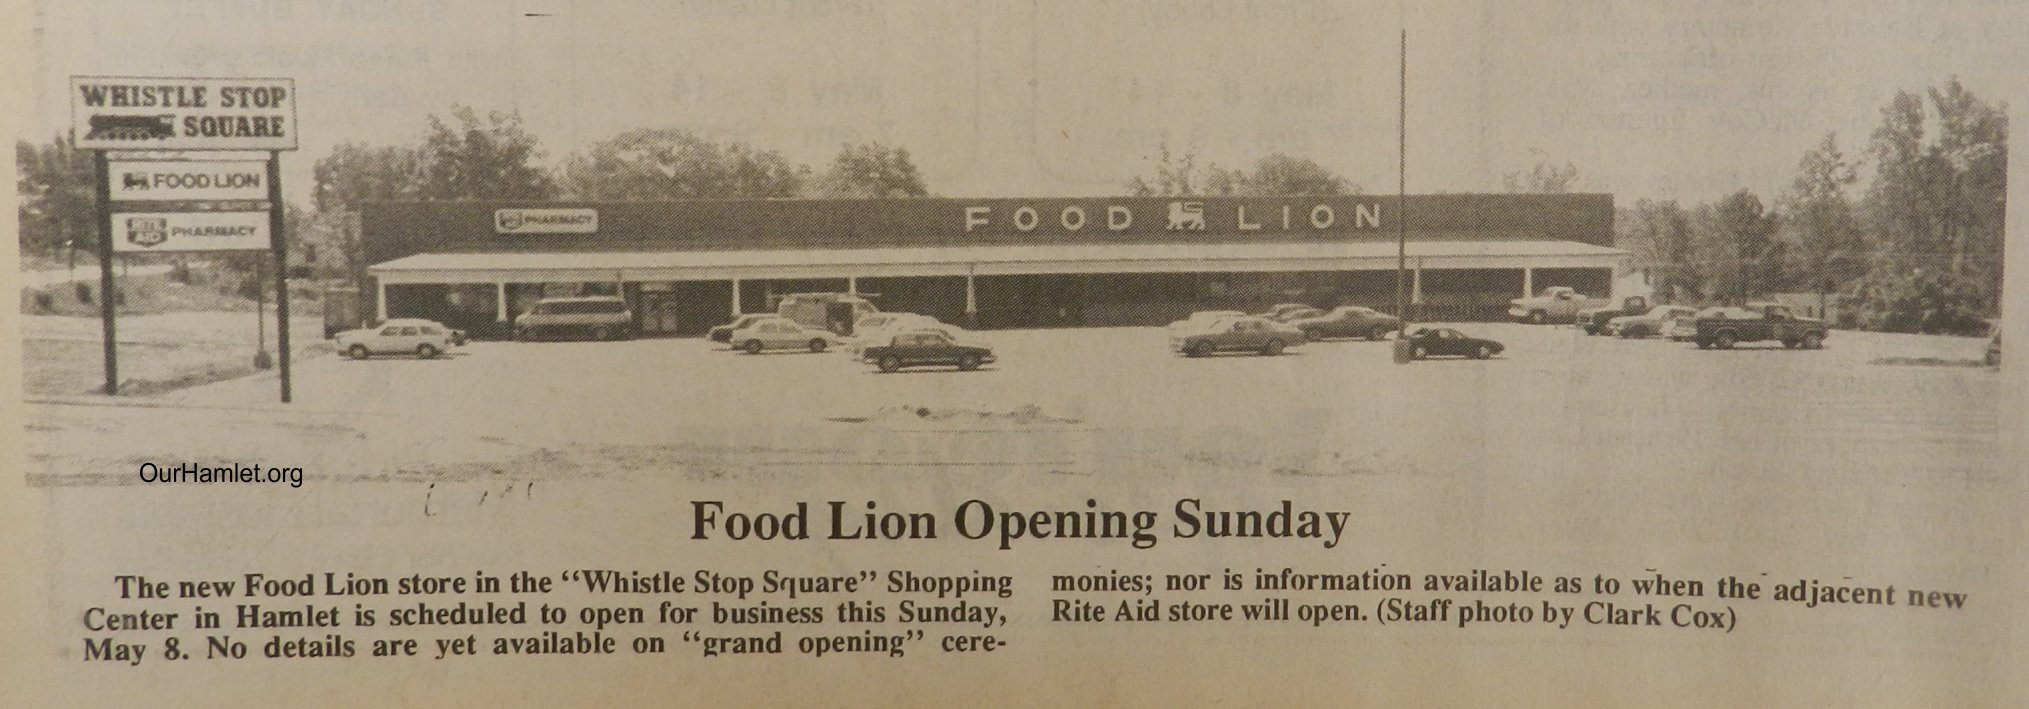 1988 Food Lion opens OH.jpg